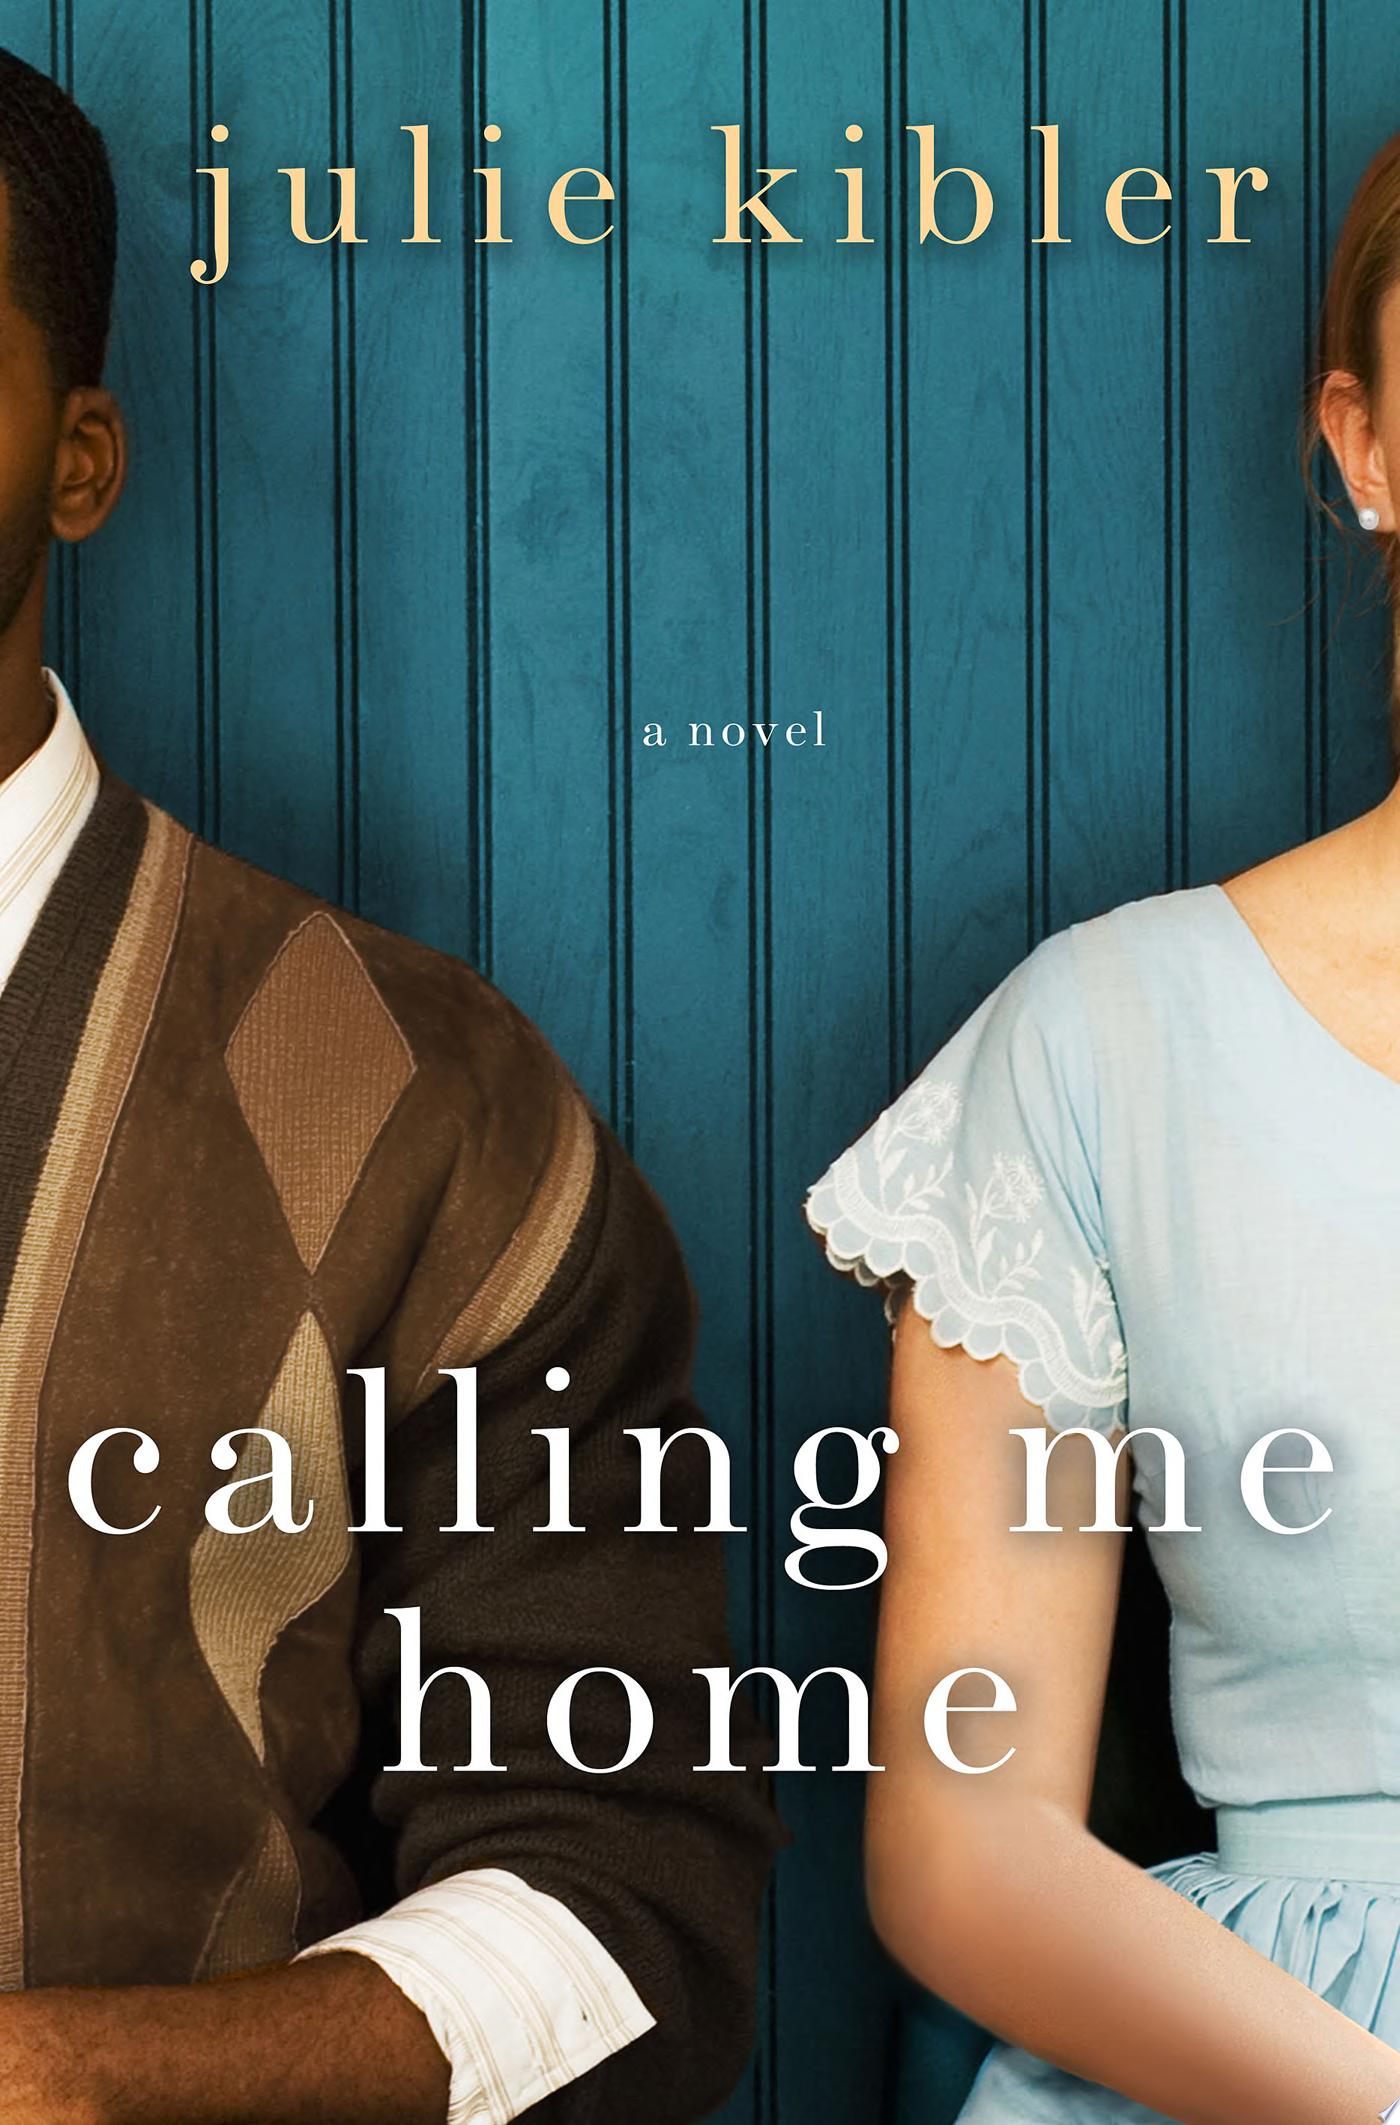 Image for "Calling Me Home"